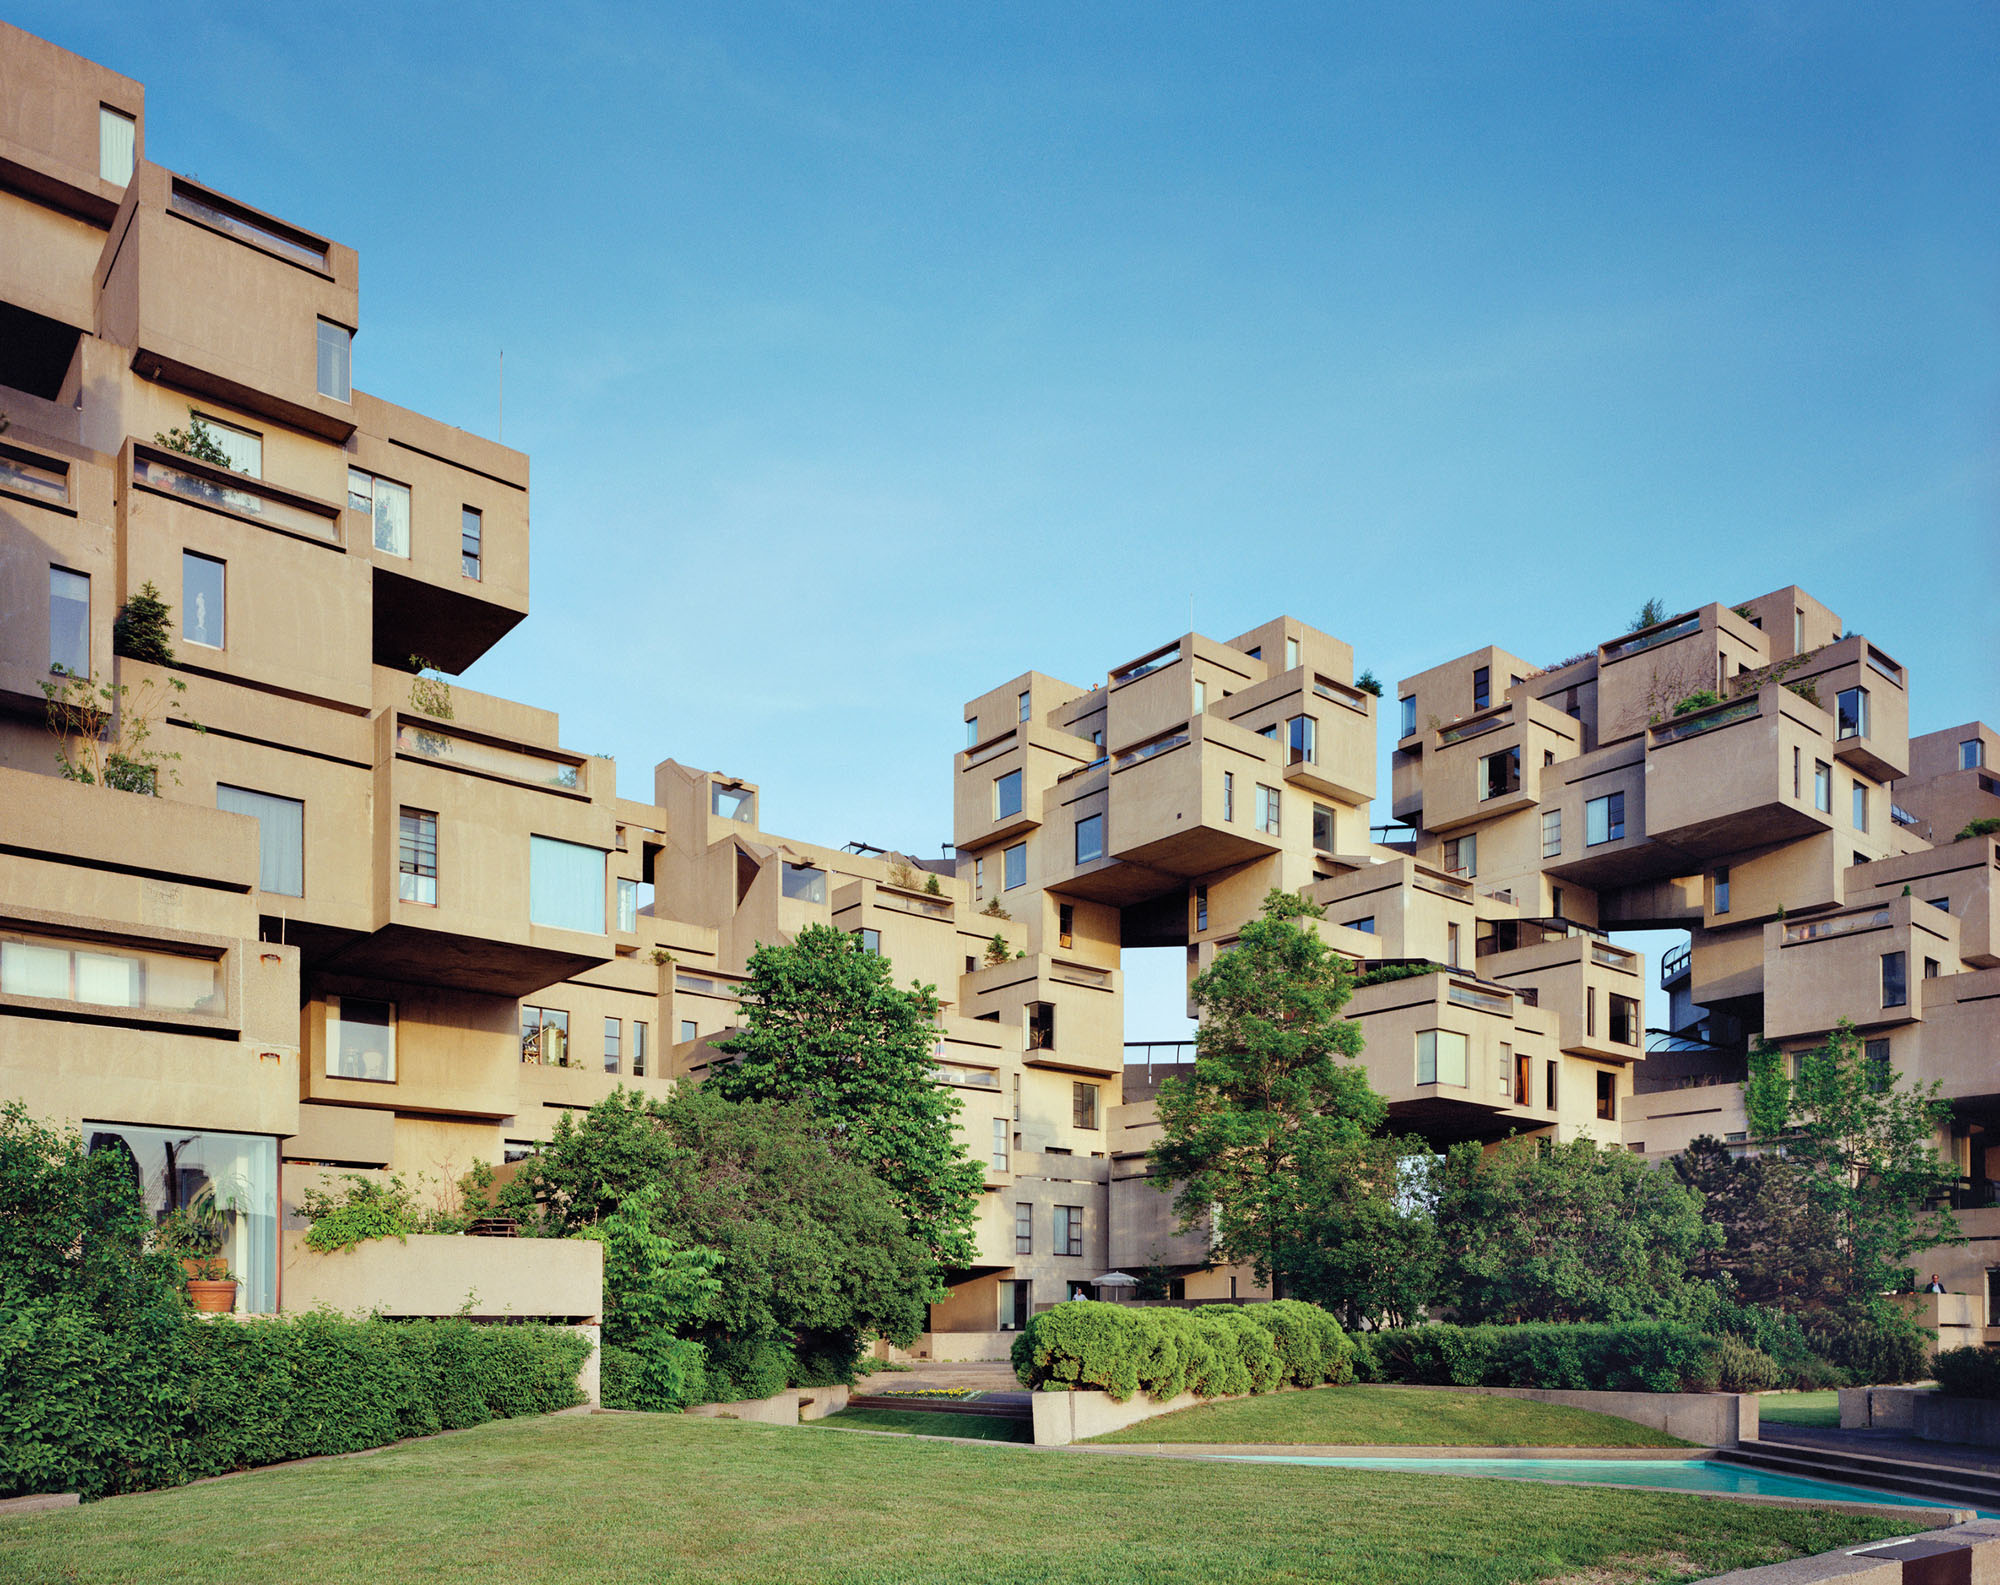 An exterior photograph of Habitat 67 in Montreal, stacks of beige boxes and abundant plantings.